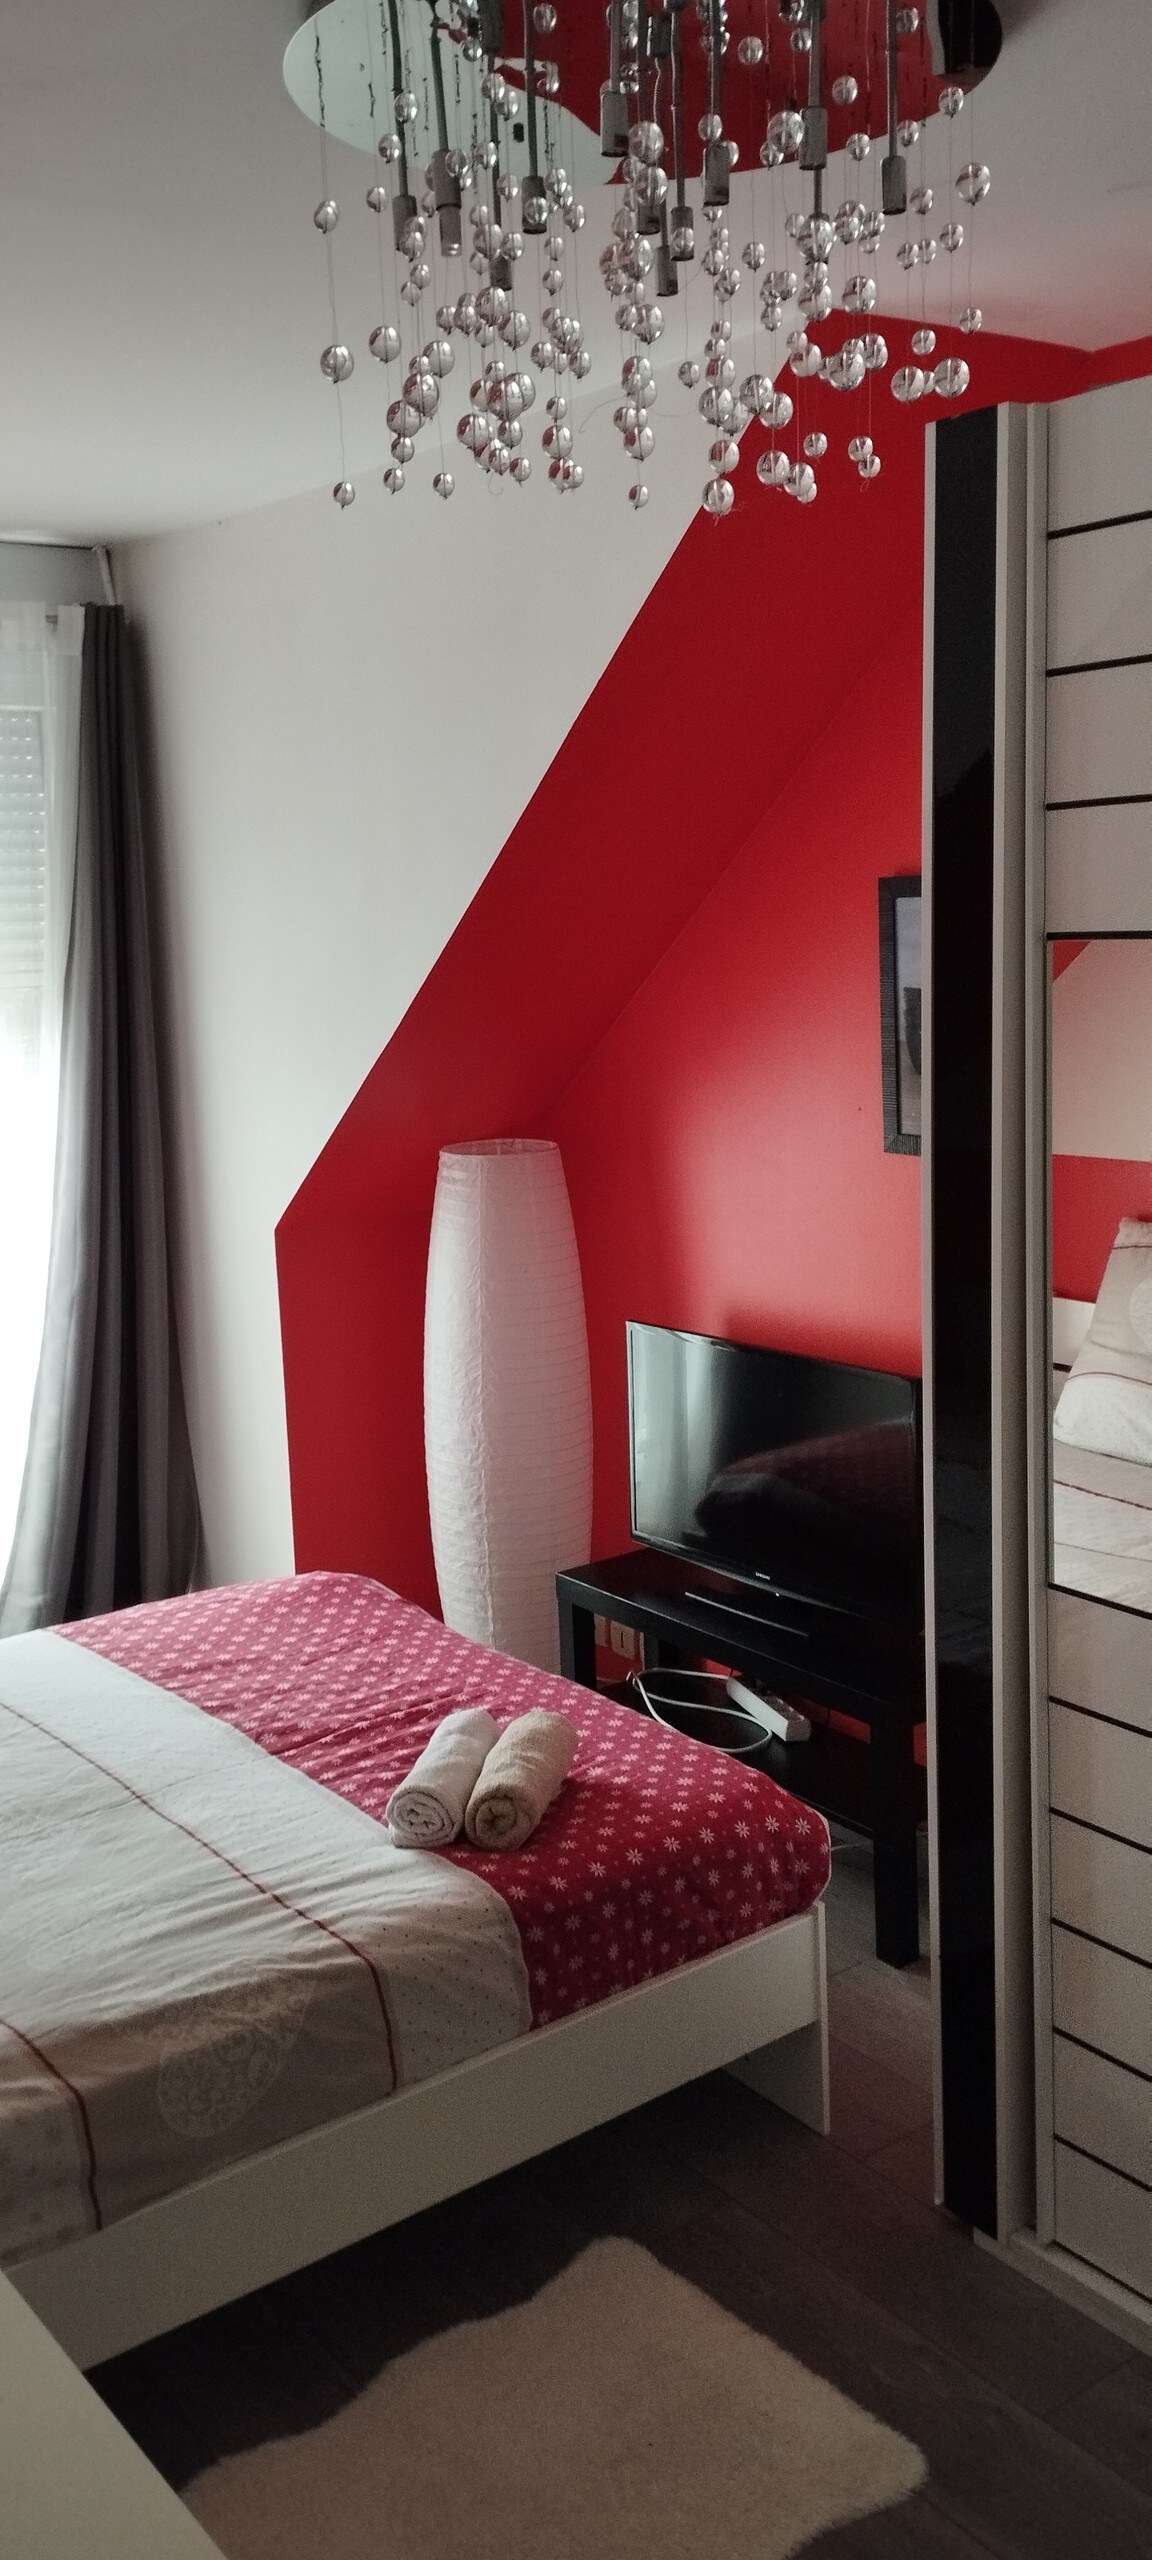 Soliers Vacation Rentals & Homes - Normandy, France | Airbnb